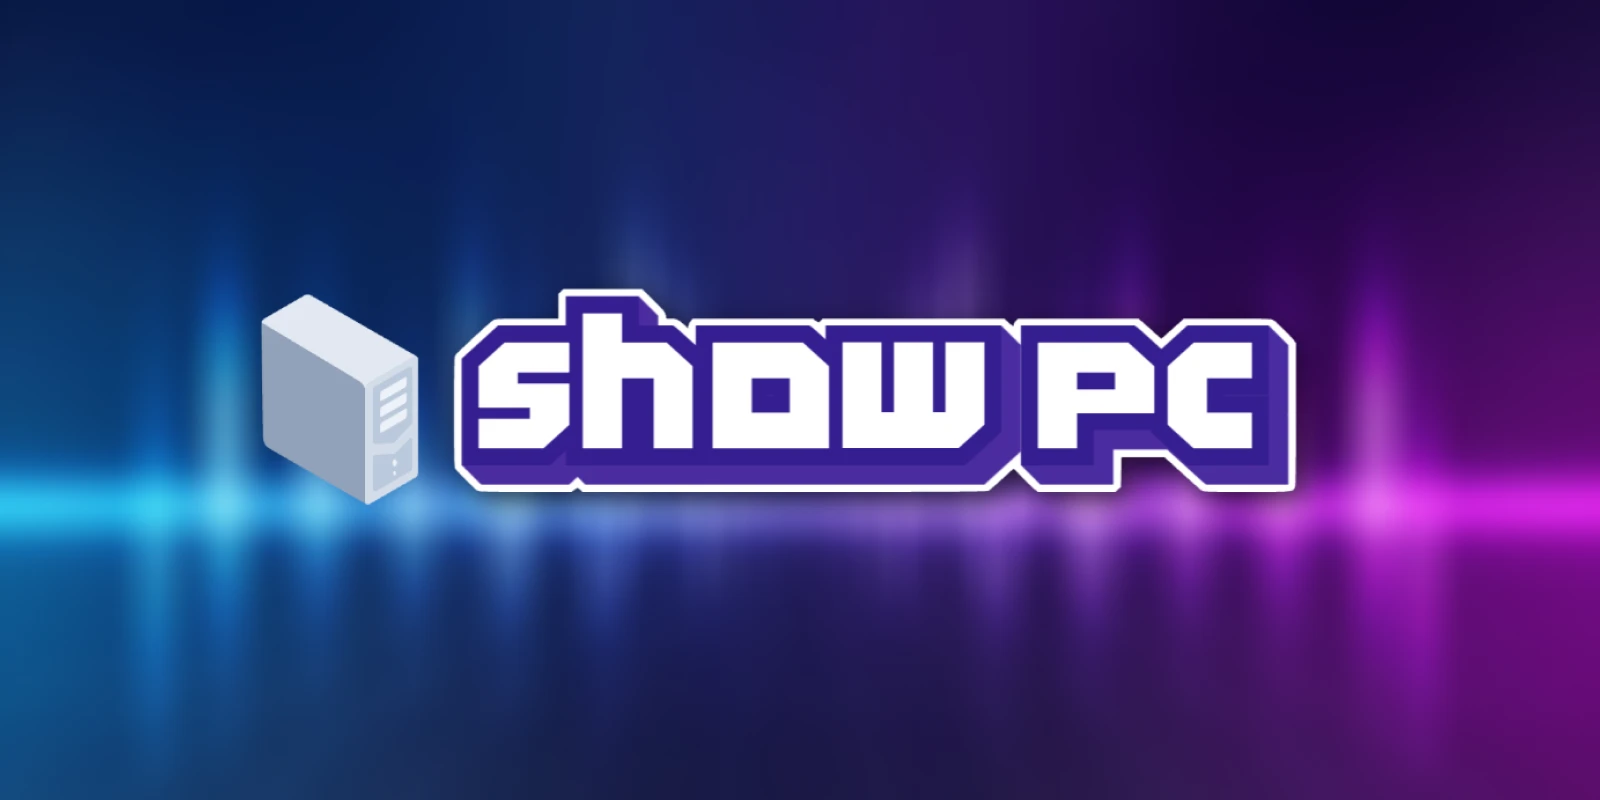 Show your pc banner